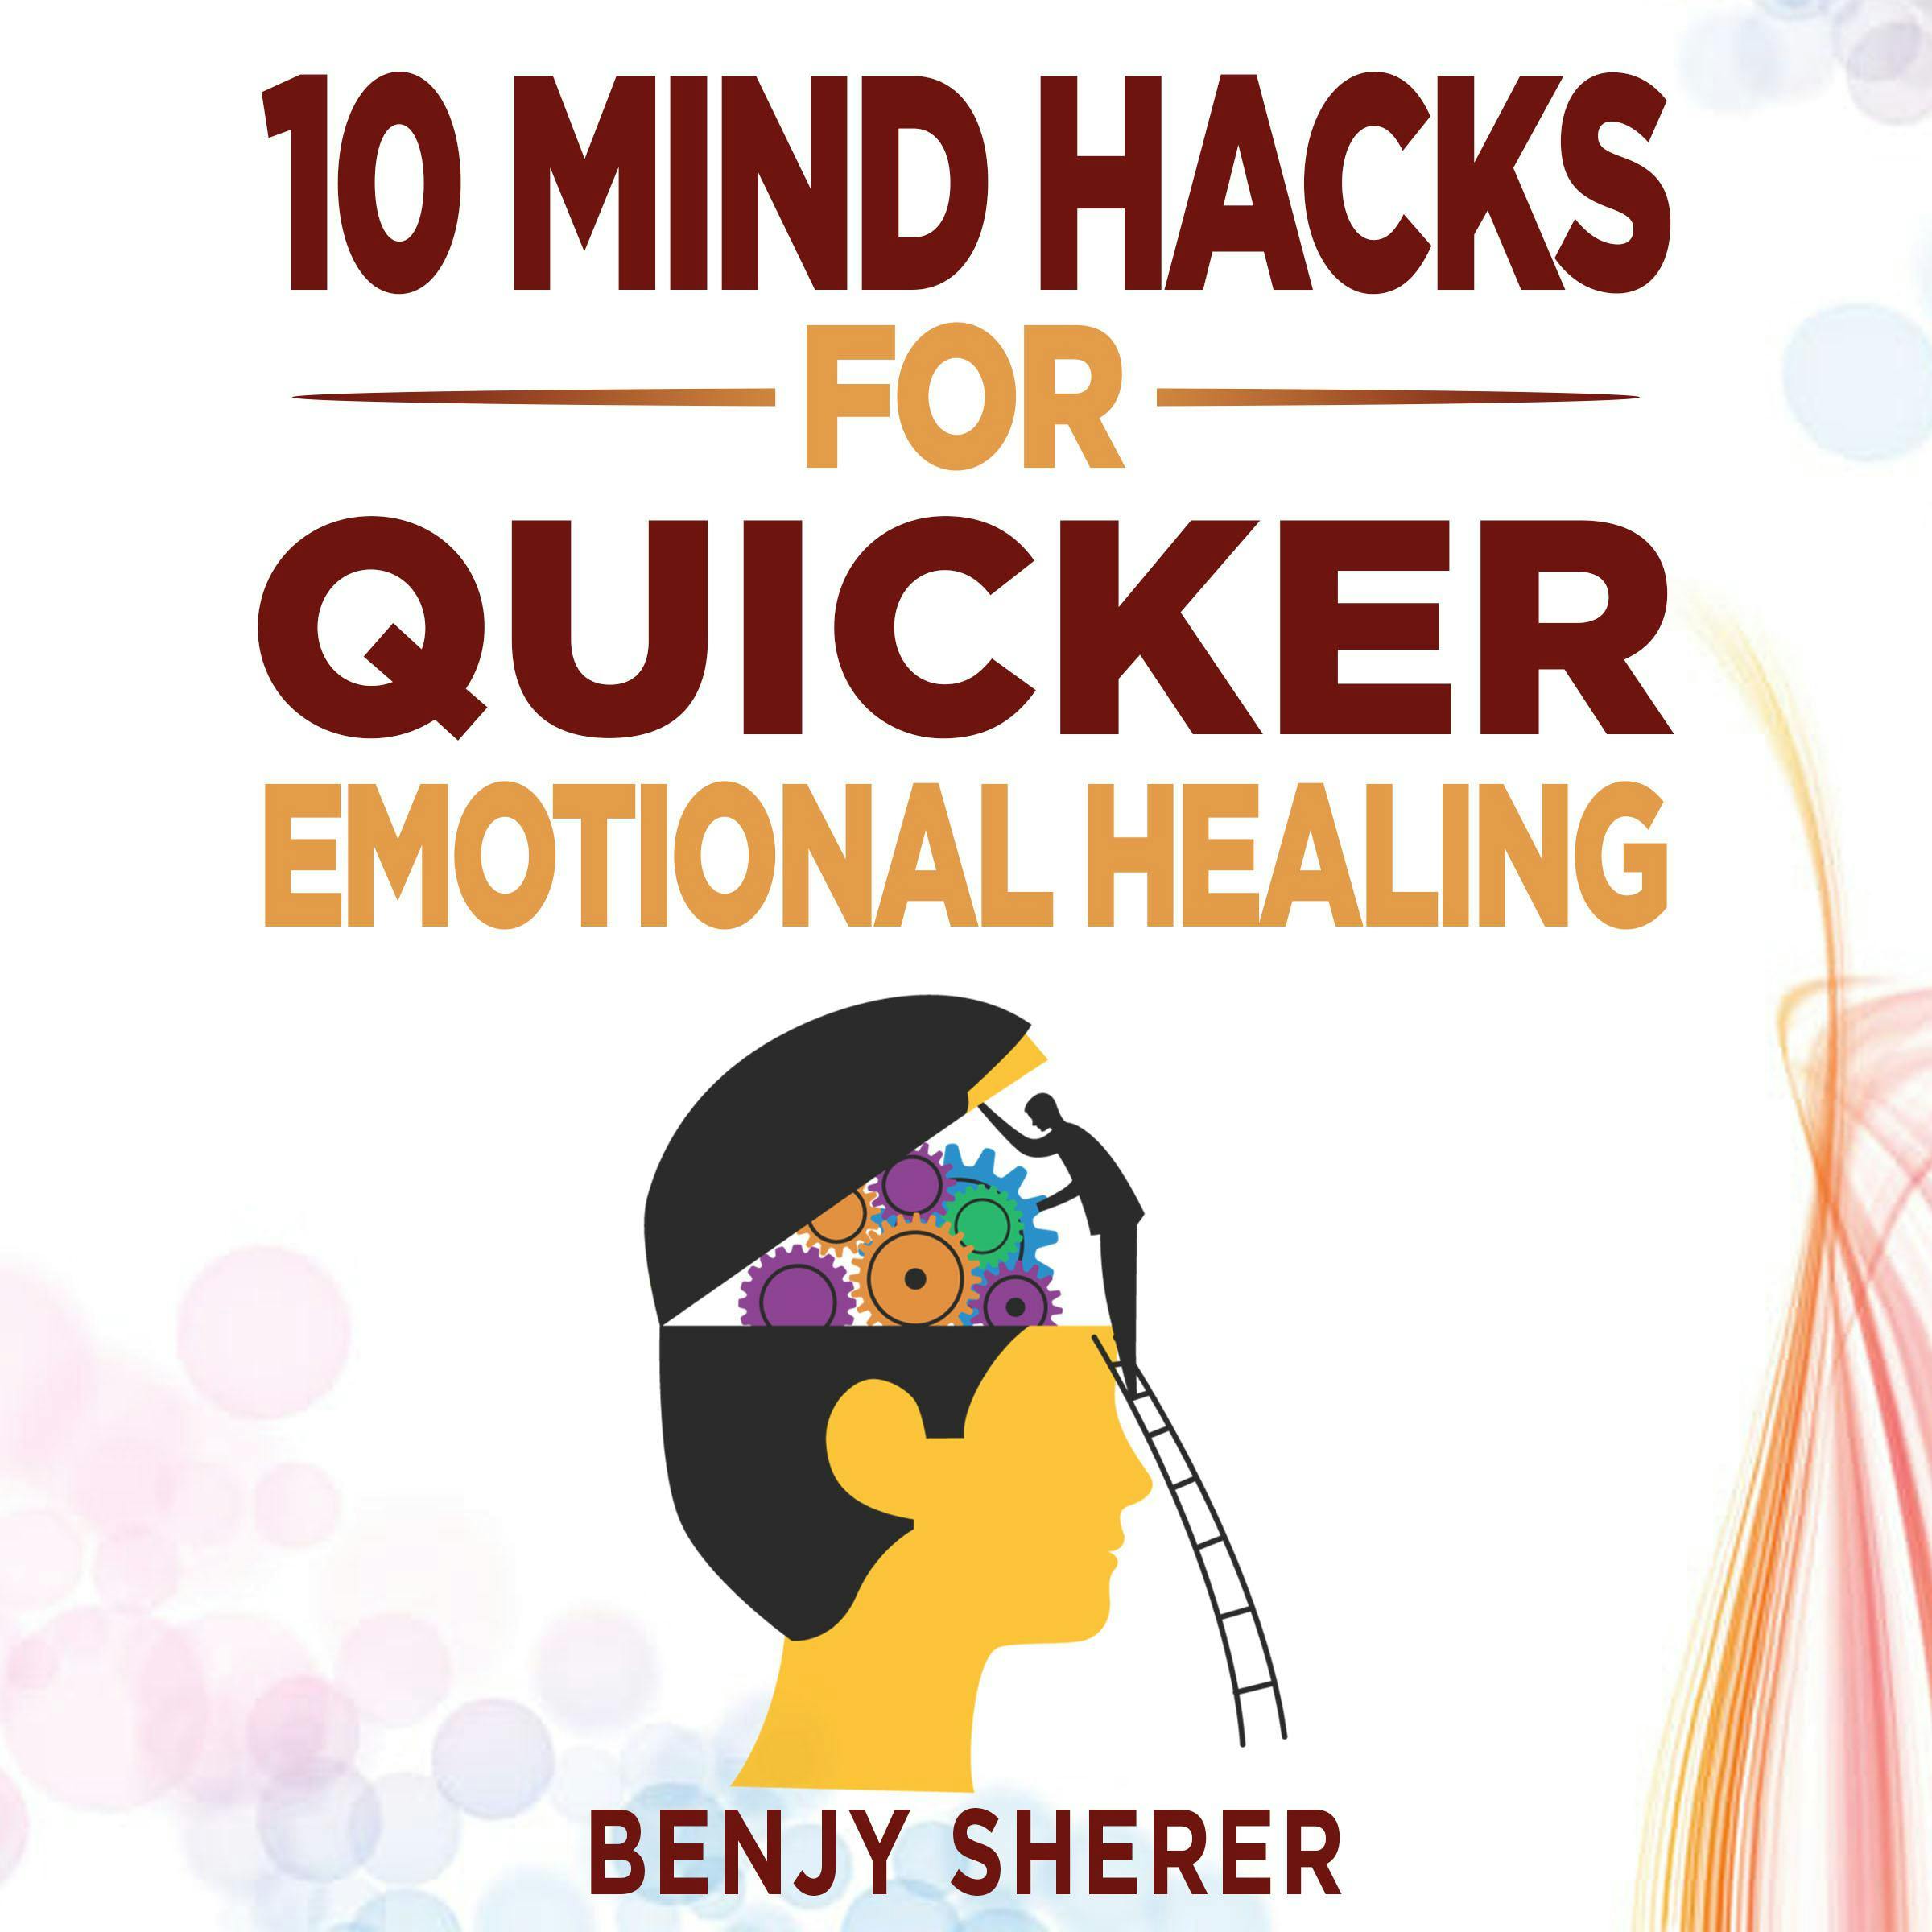 10 Mind Hacks for Quicker Emotional Healing: Hacking Your Brain Training Book for Healing Your Emotional Self. - undefined